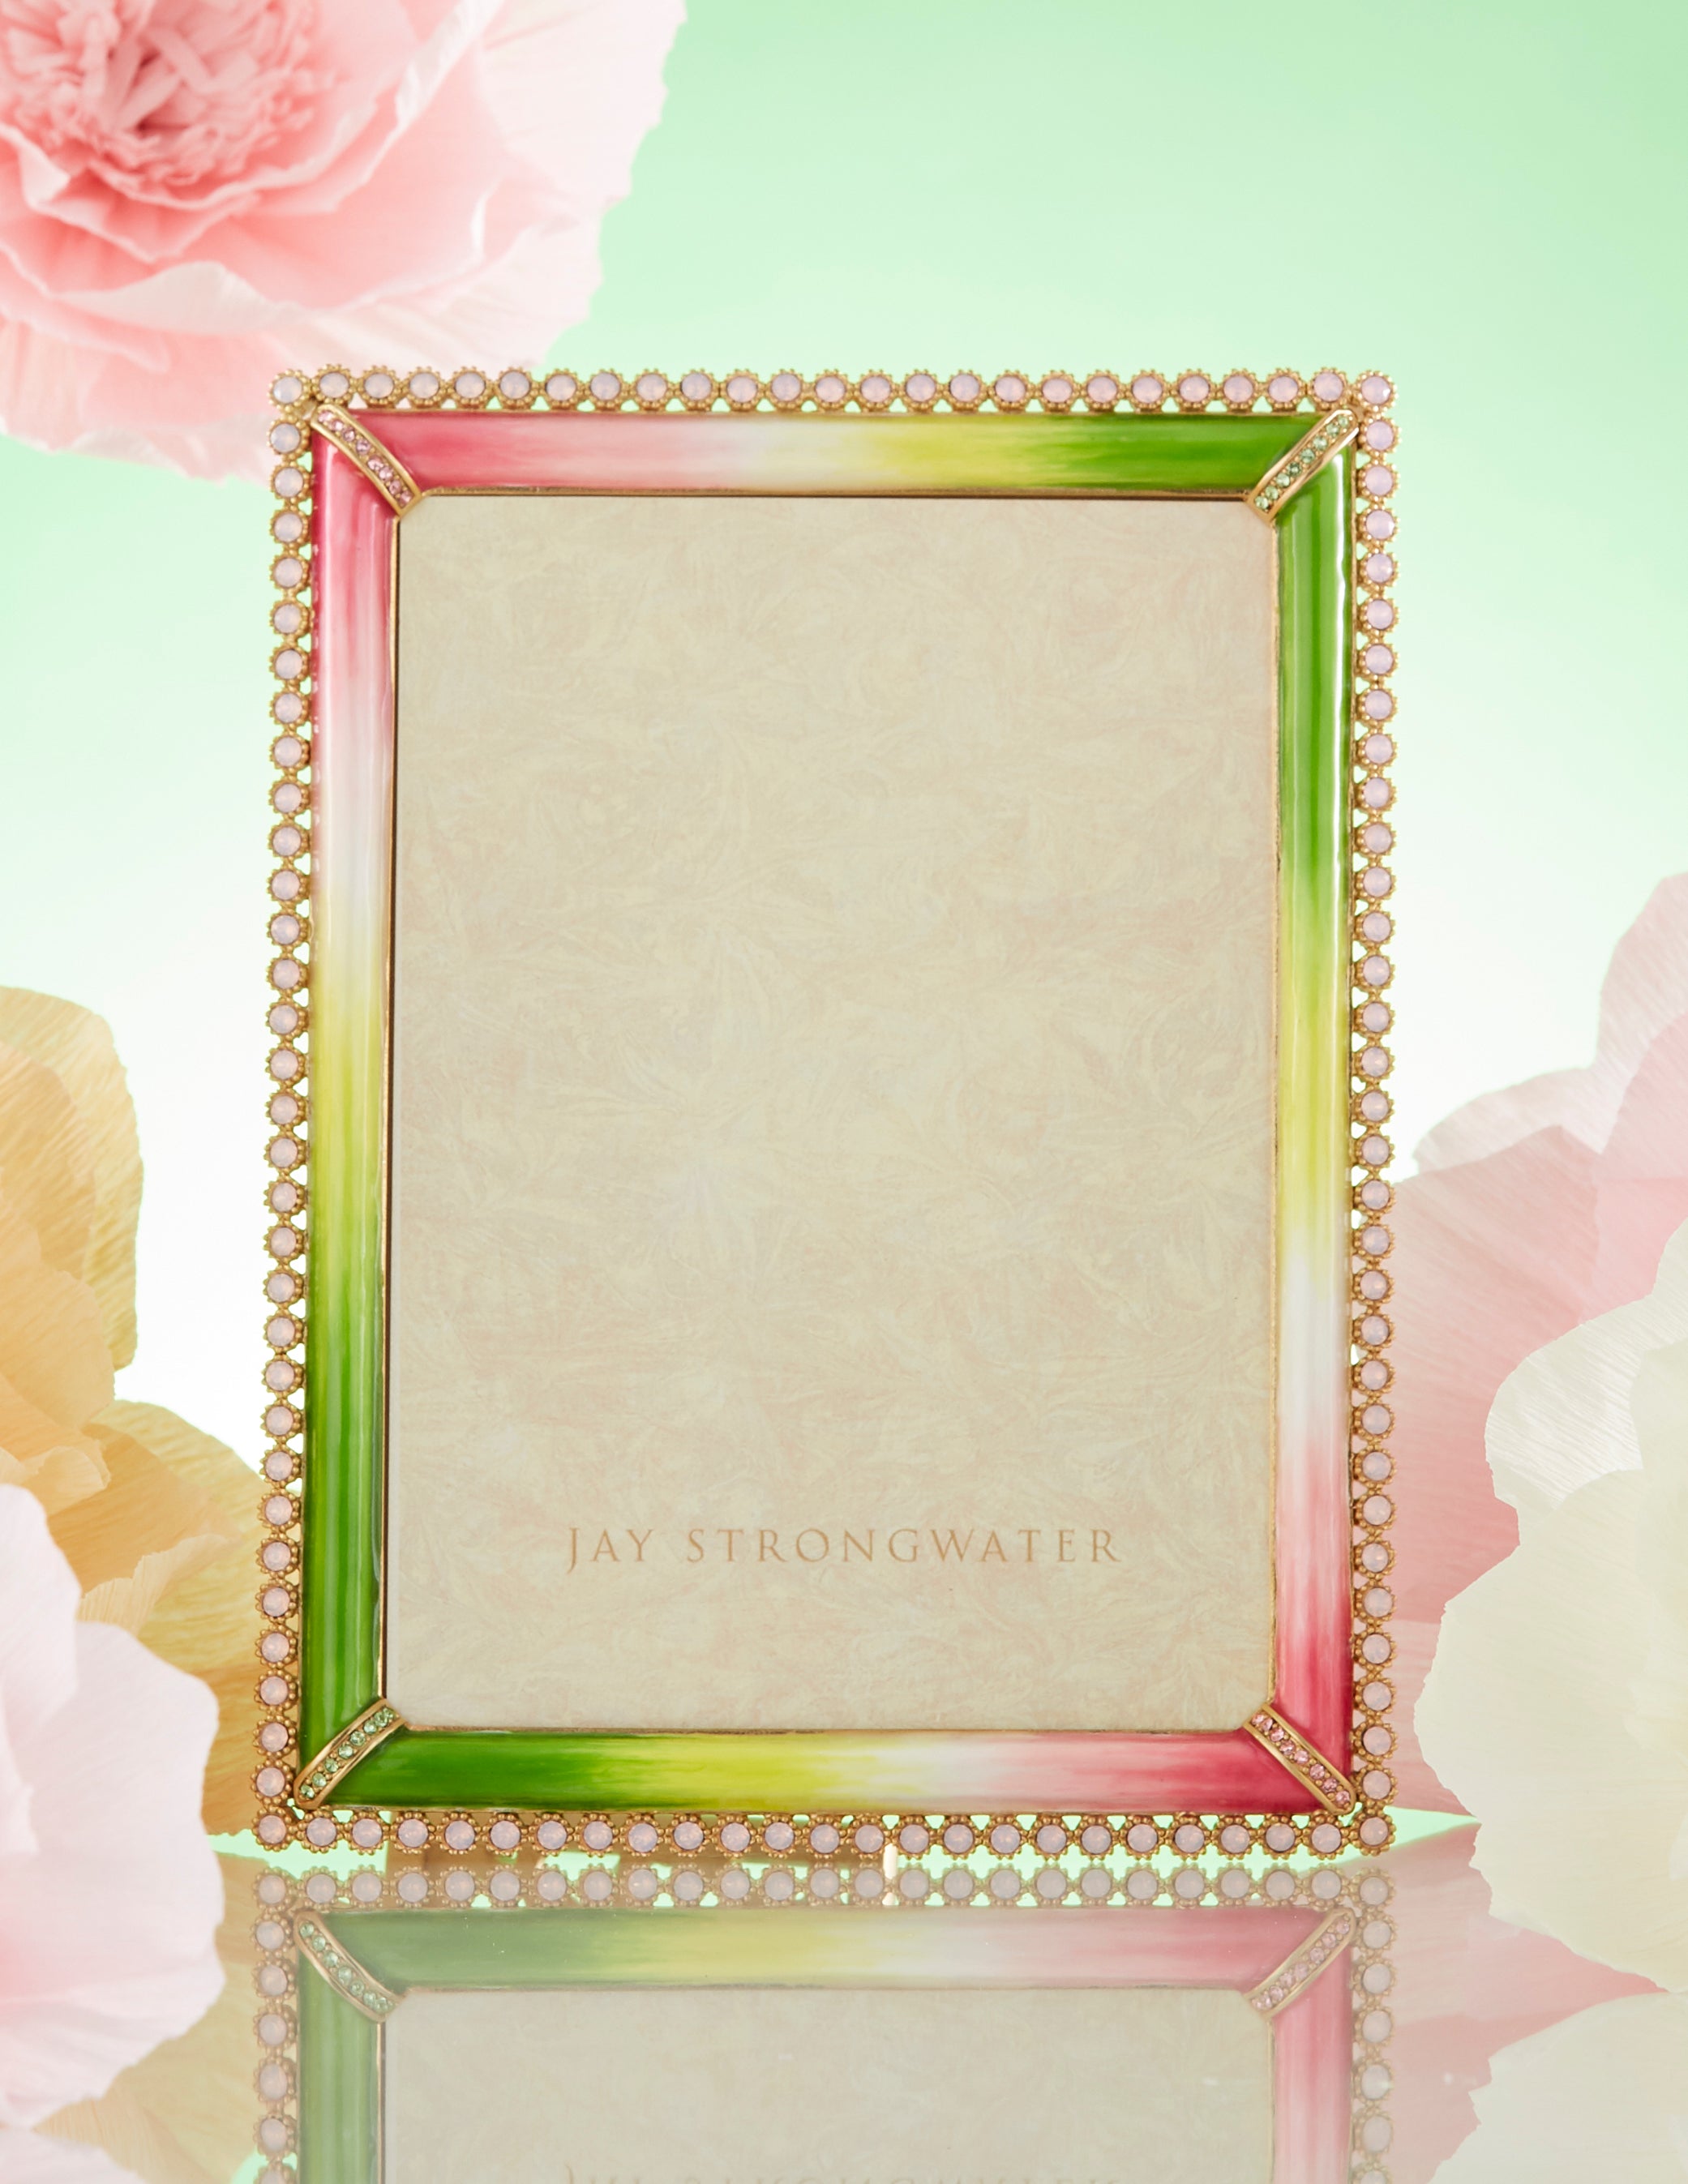 5" x 7" Green and Pink Picture Frame 